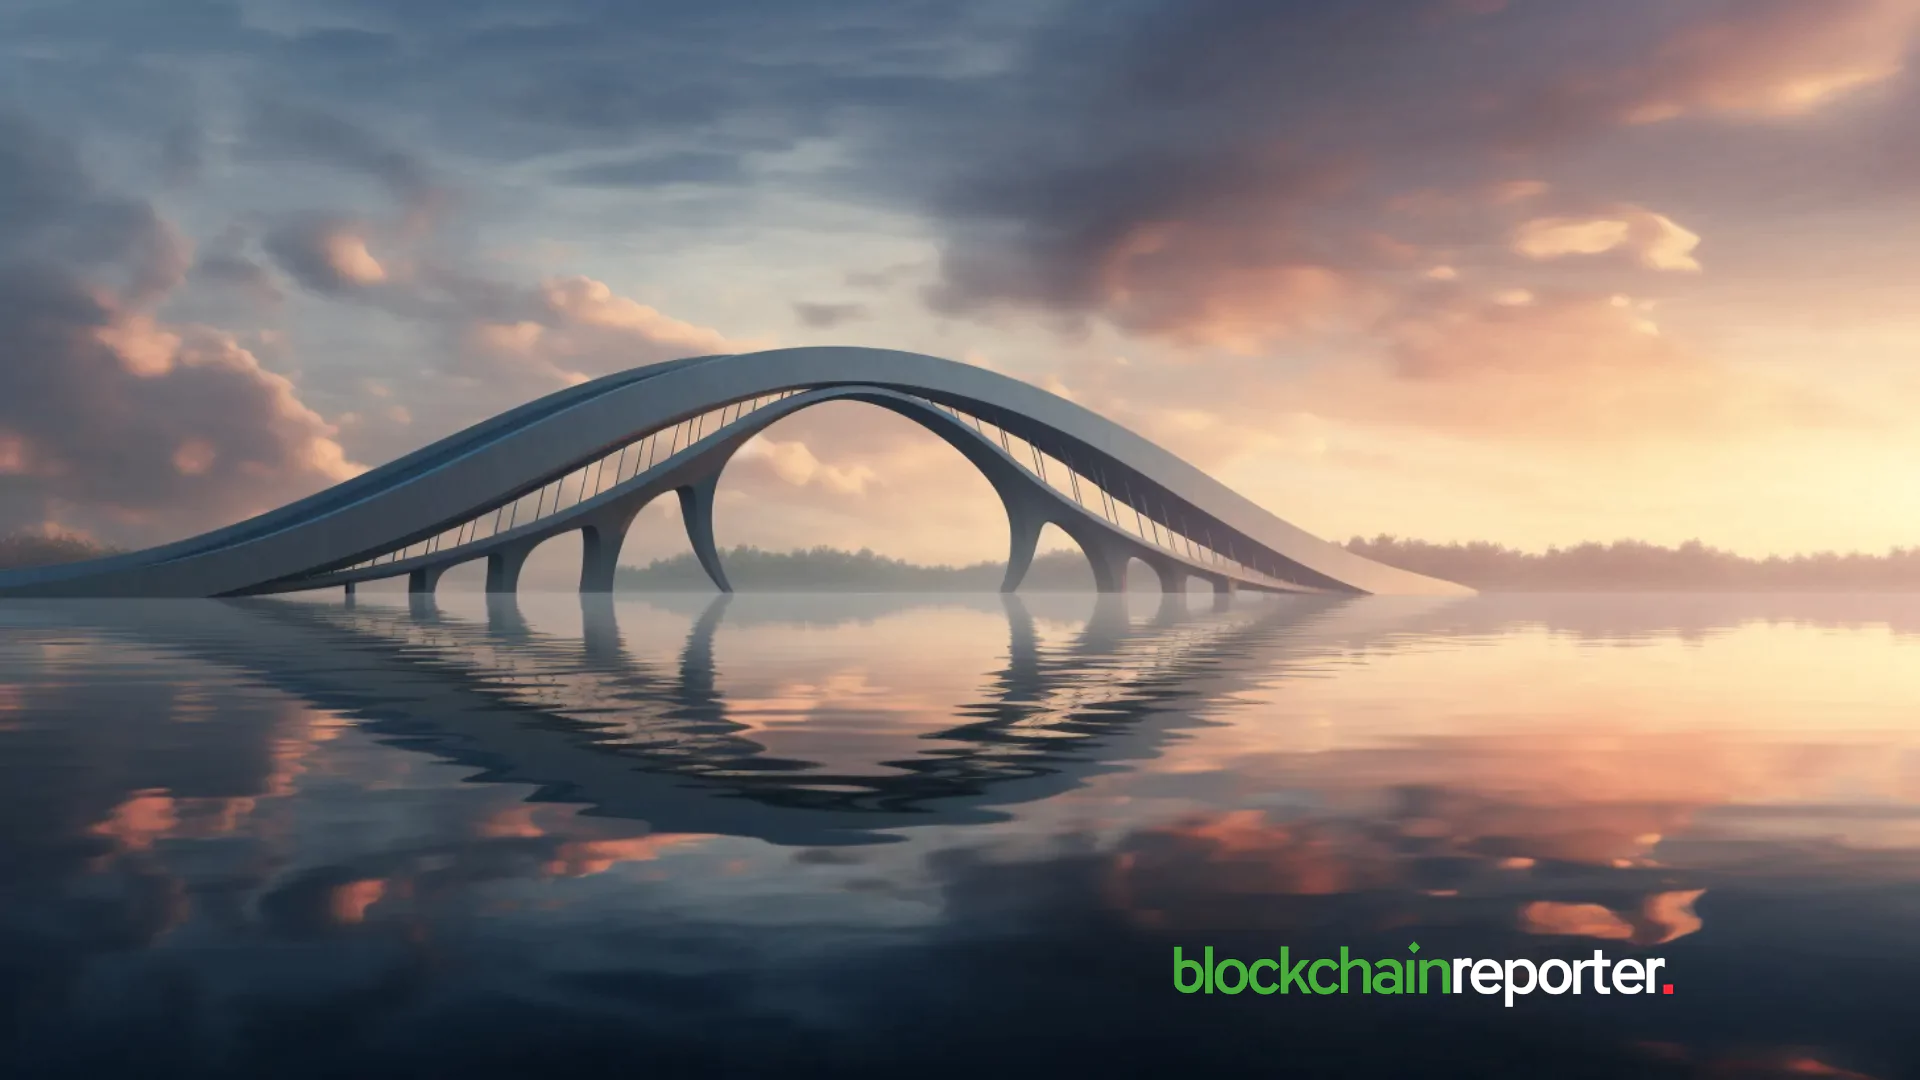 TokenBridge App is Live: It Connects Solana & NEAR Protocol